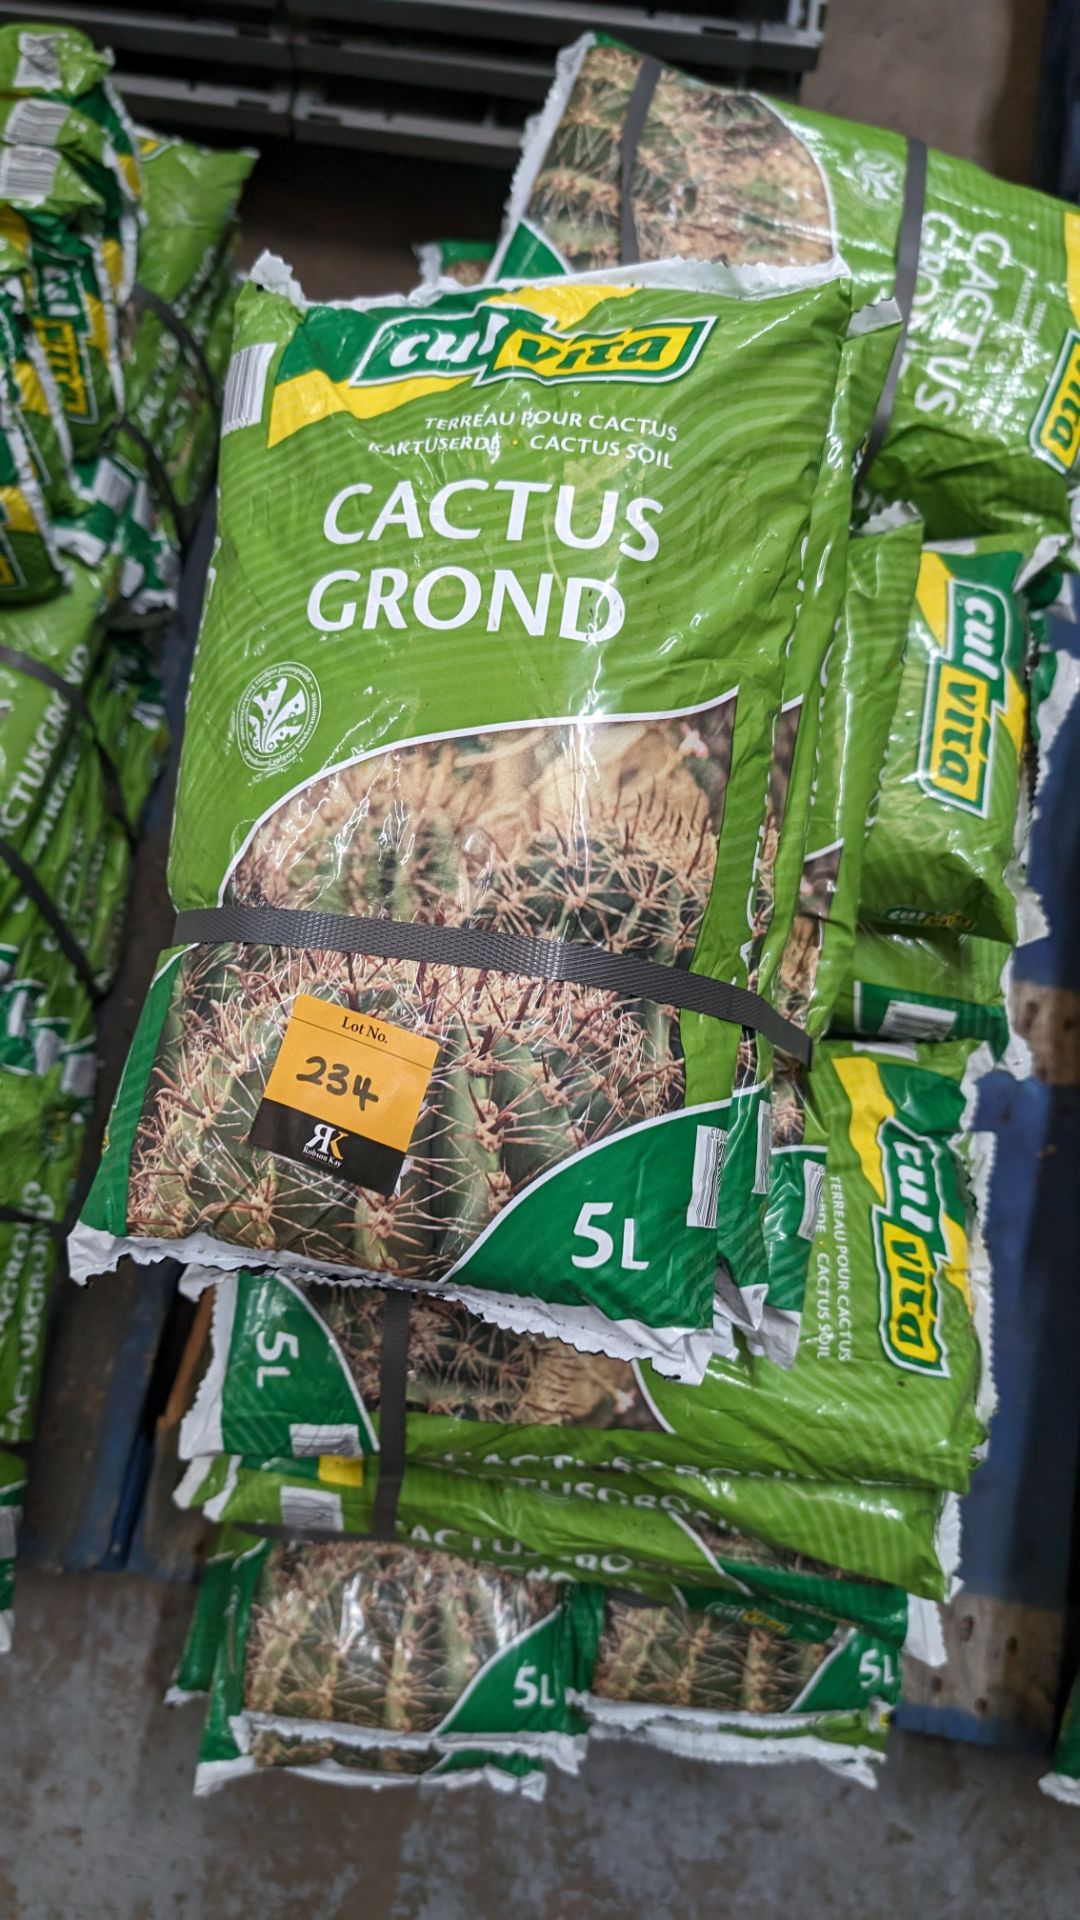 50 off 5 litre bags of Culvita Cactus Grond - Image 4 of 4